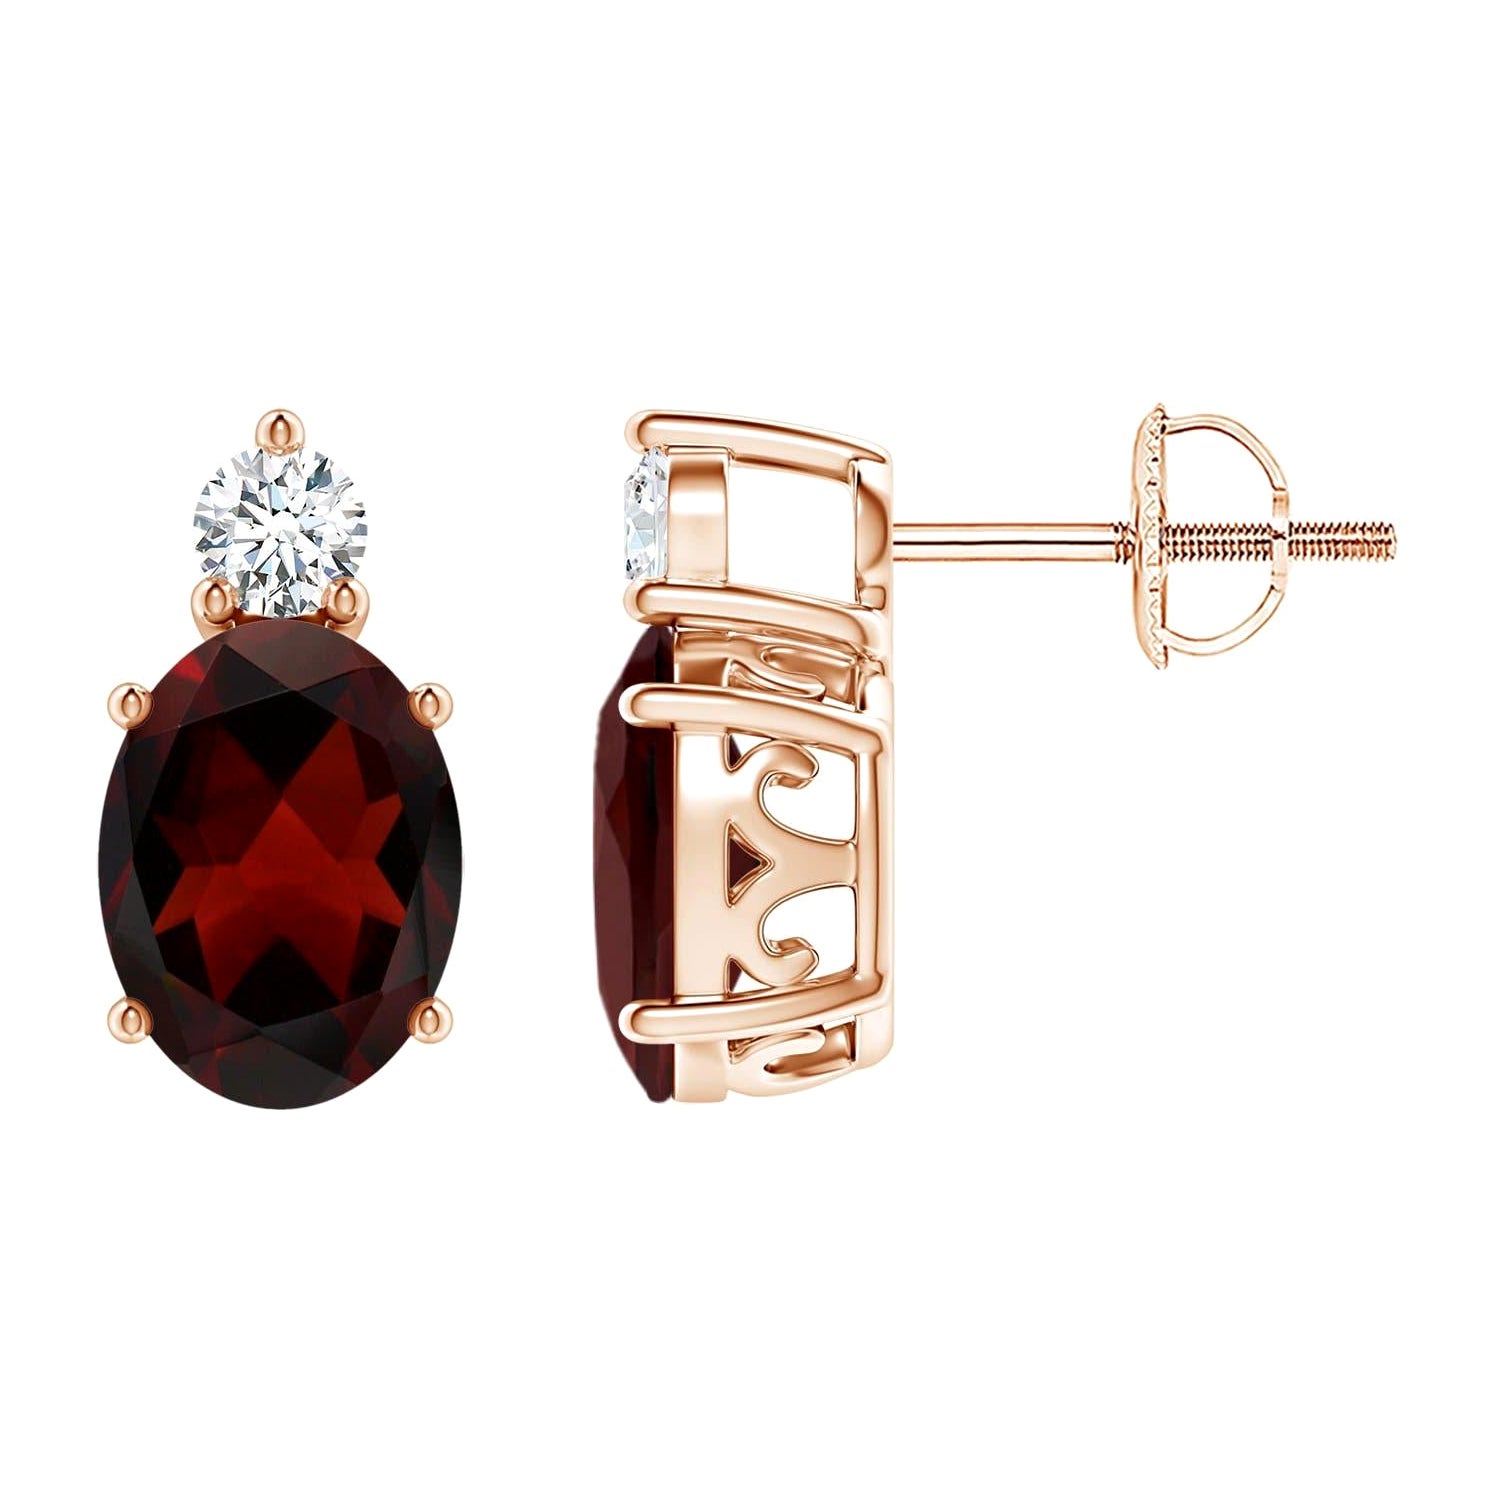 Natural Oval 2.9ct Garnet Stud Earrings with Diamond in 14K Rose Gold